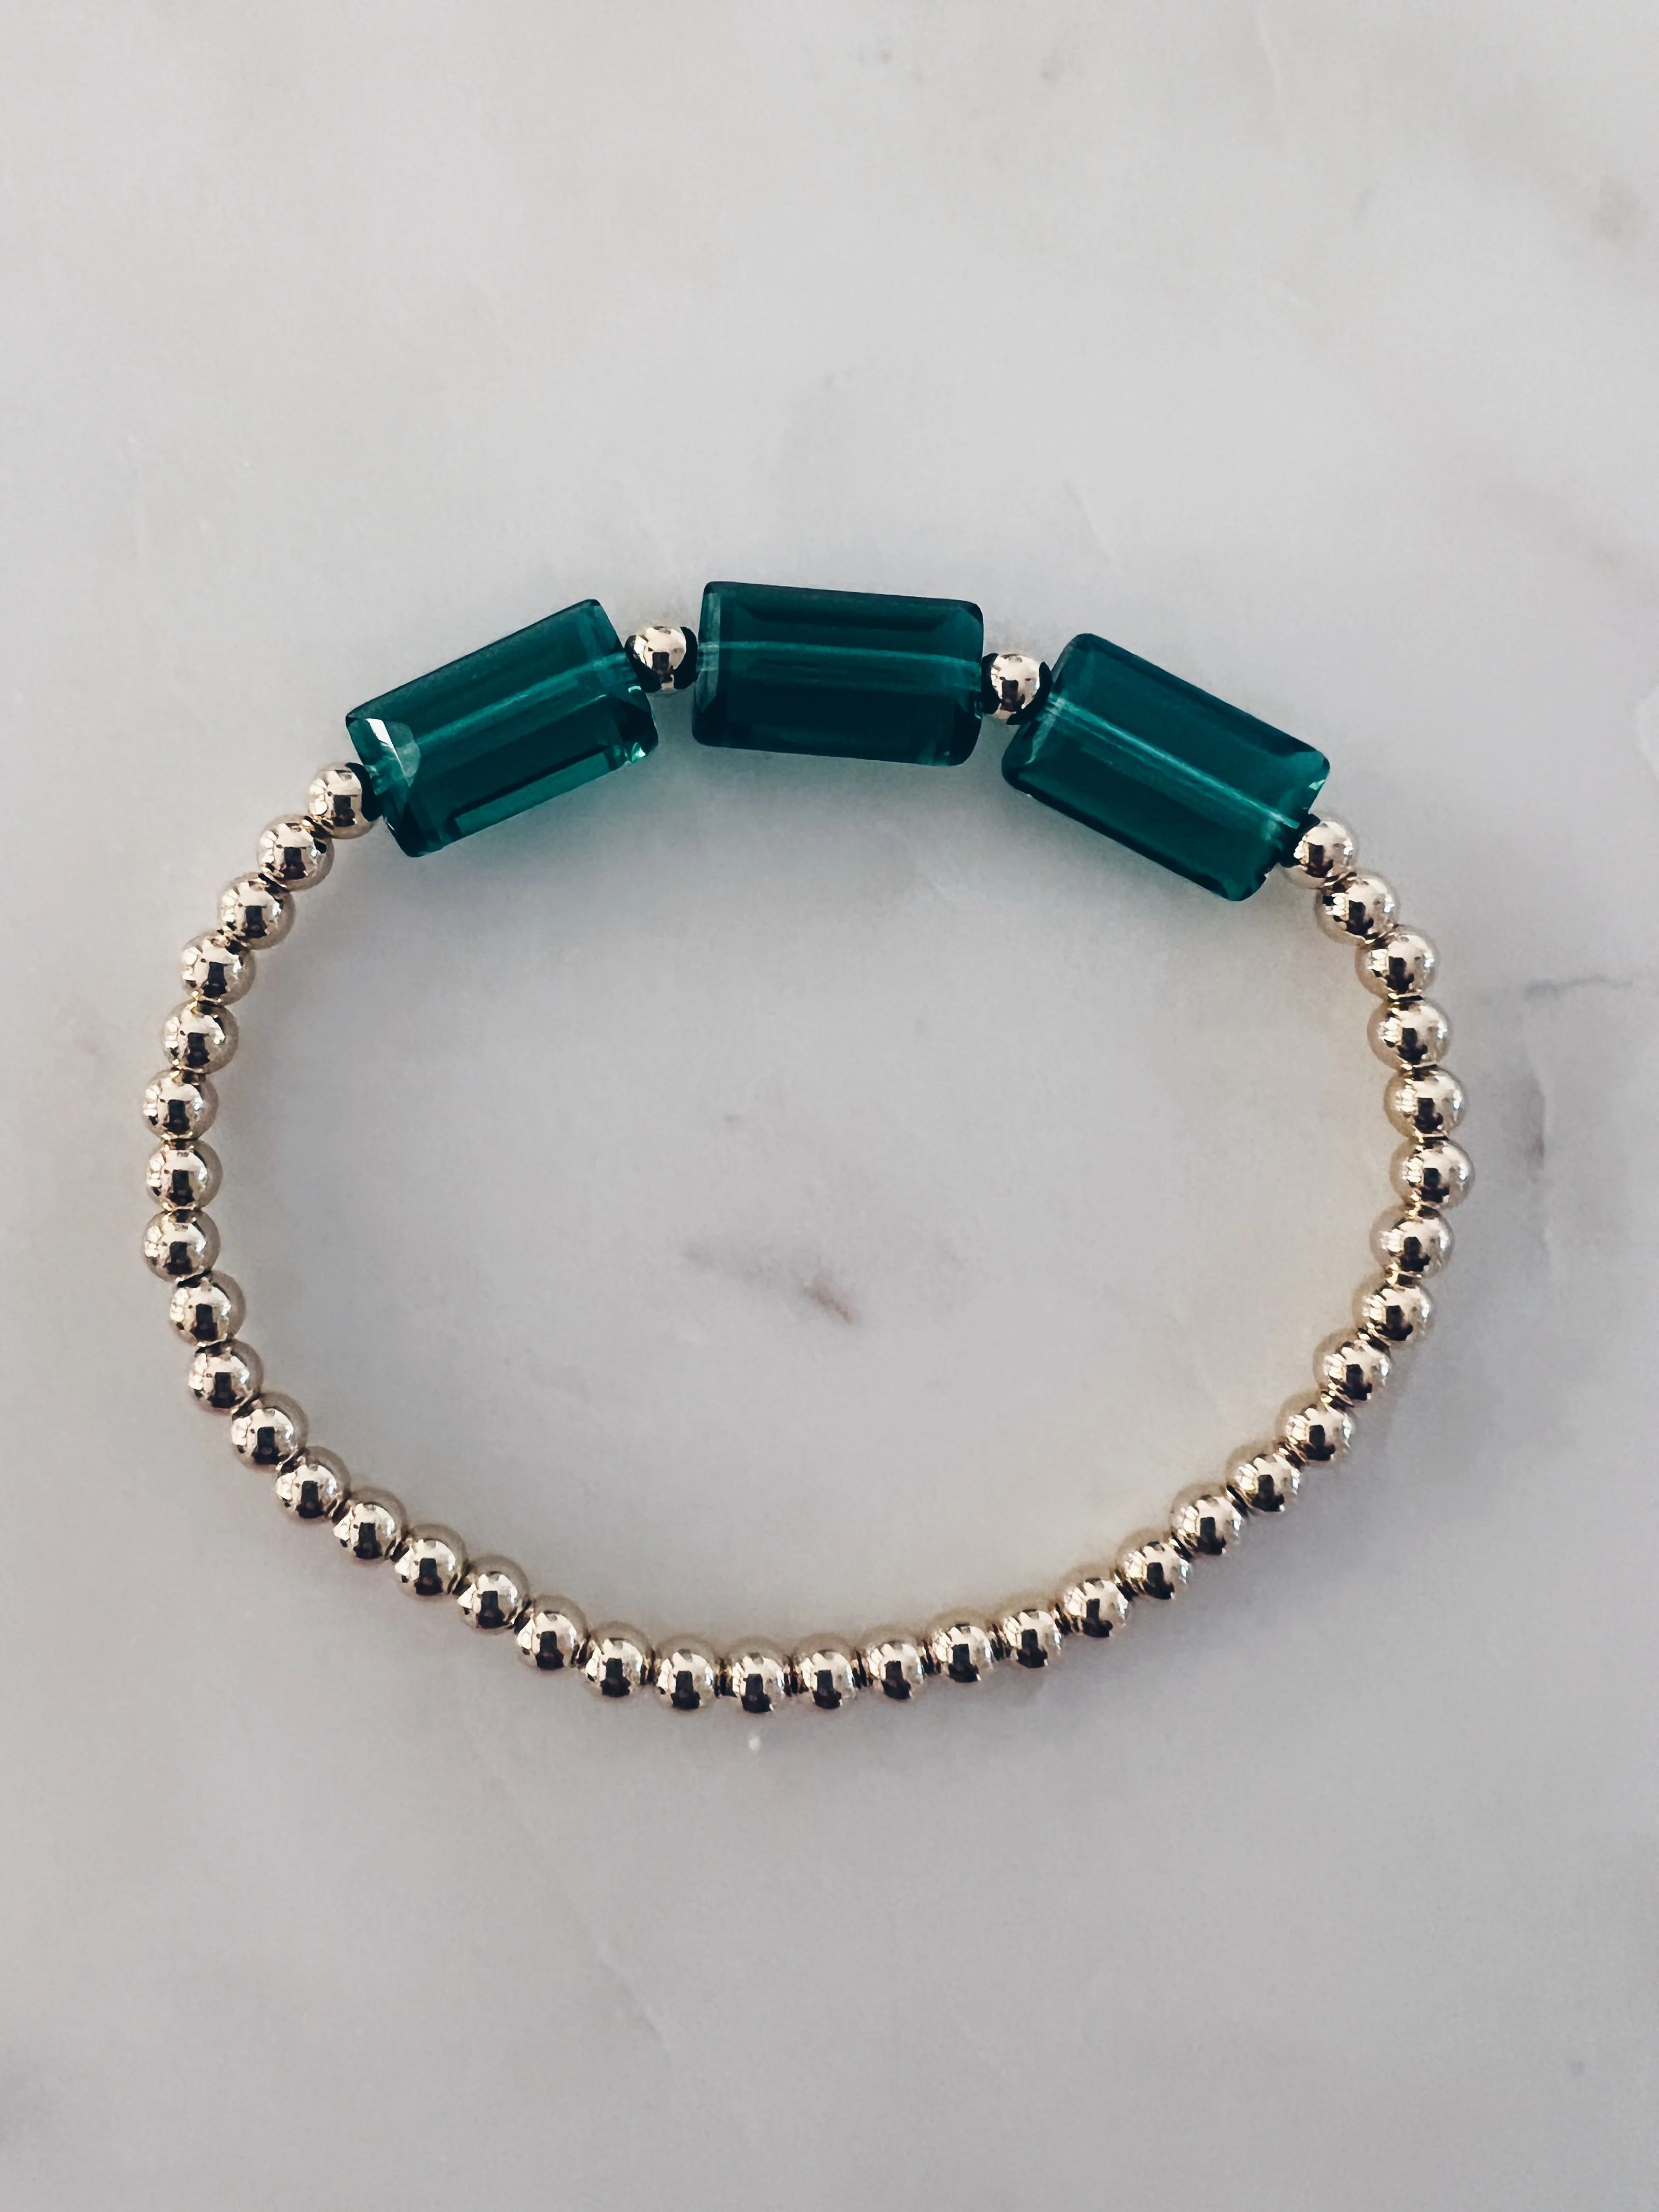 Grecian Bracelet + More Colors | Mac and Ry Jewelry